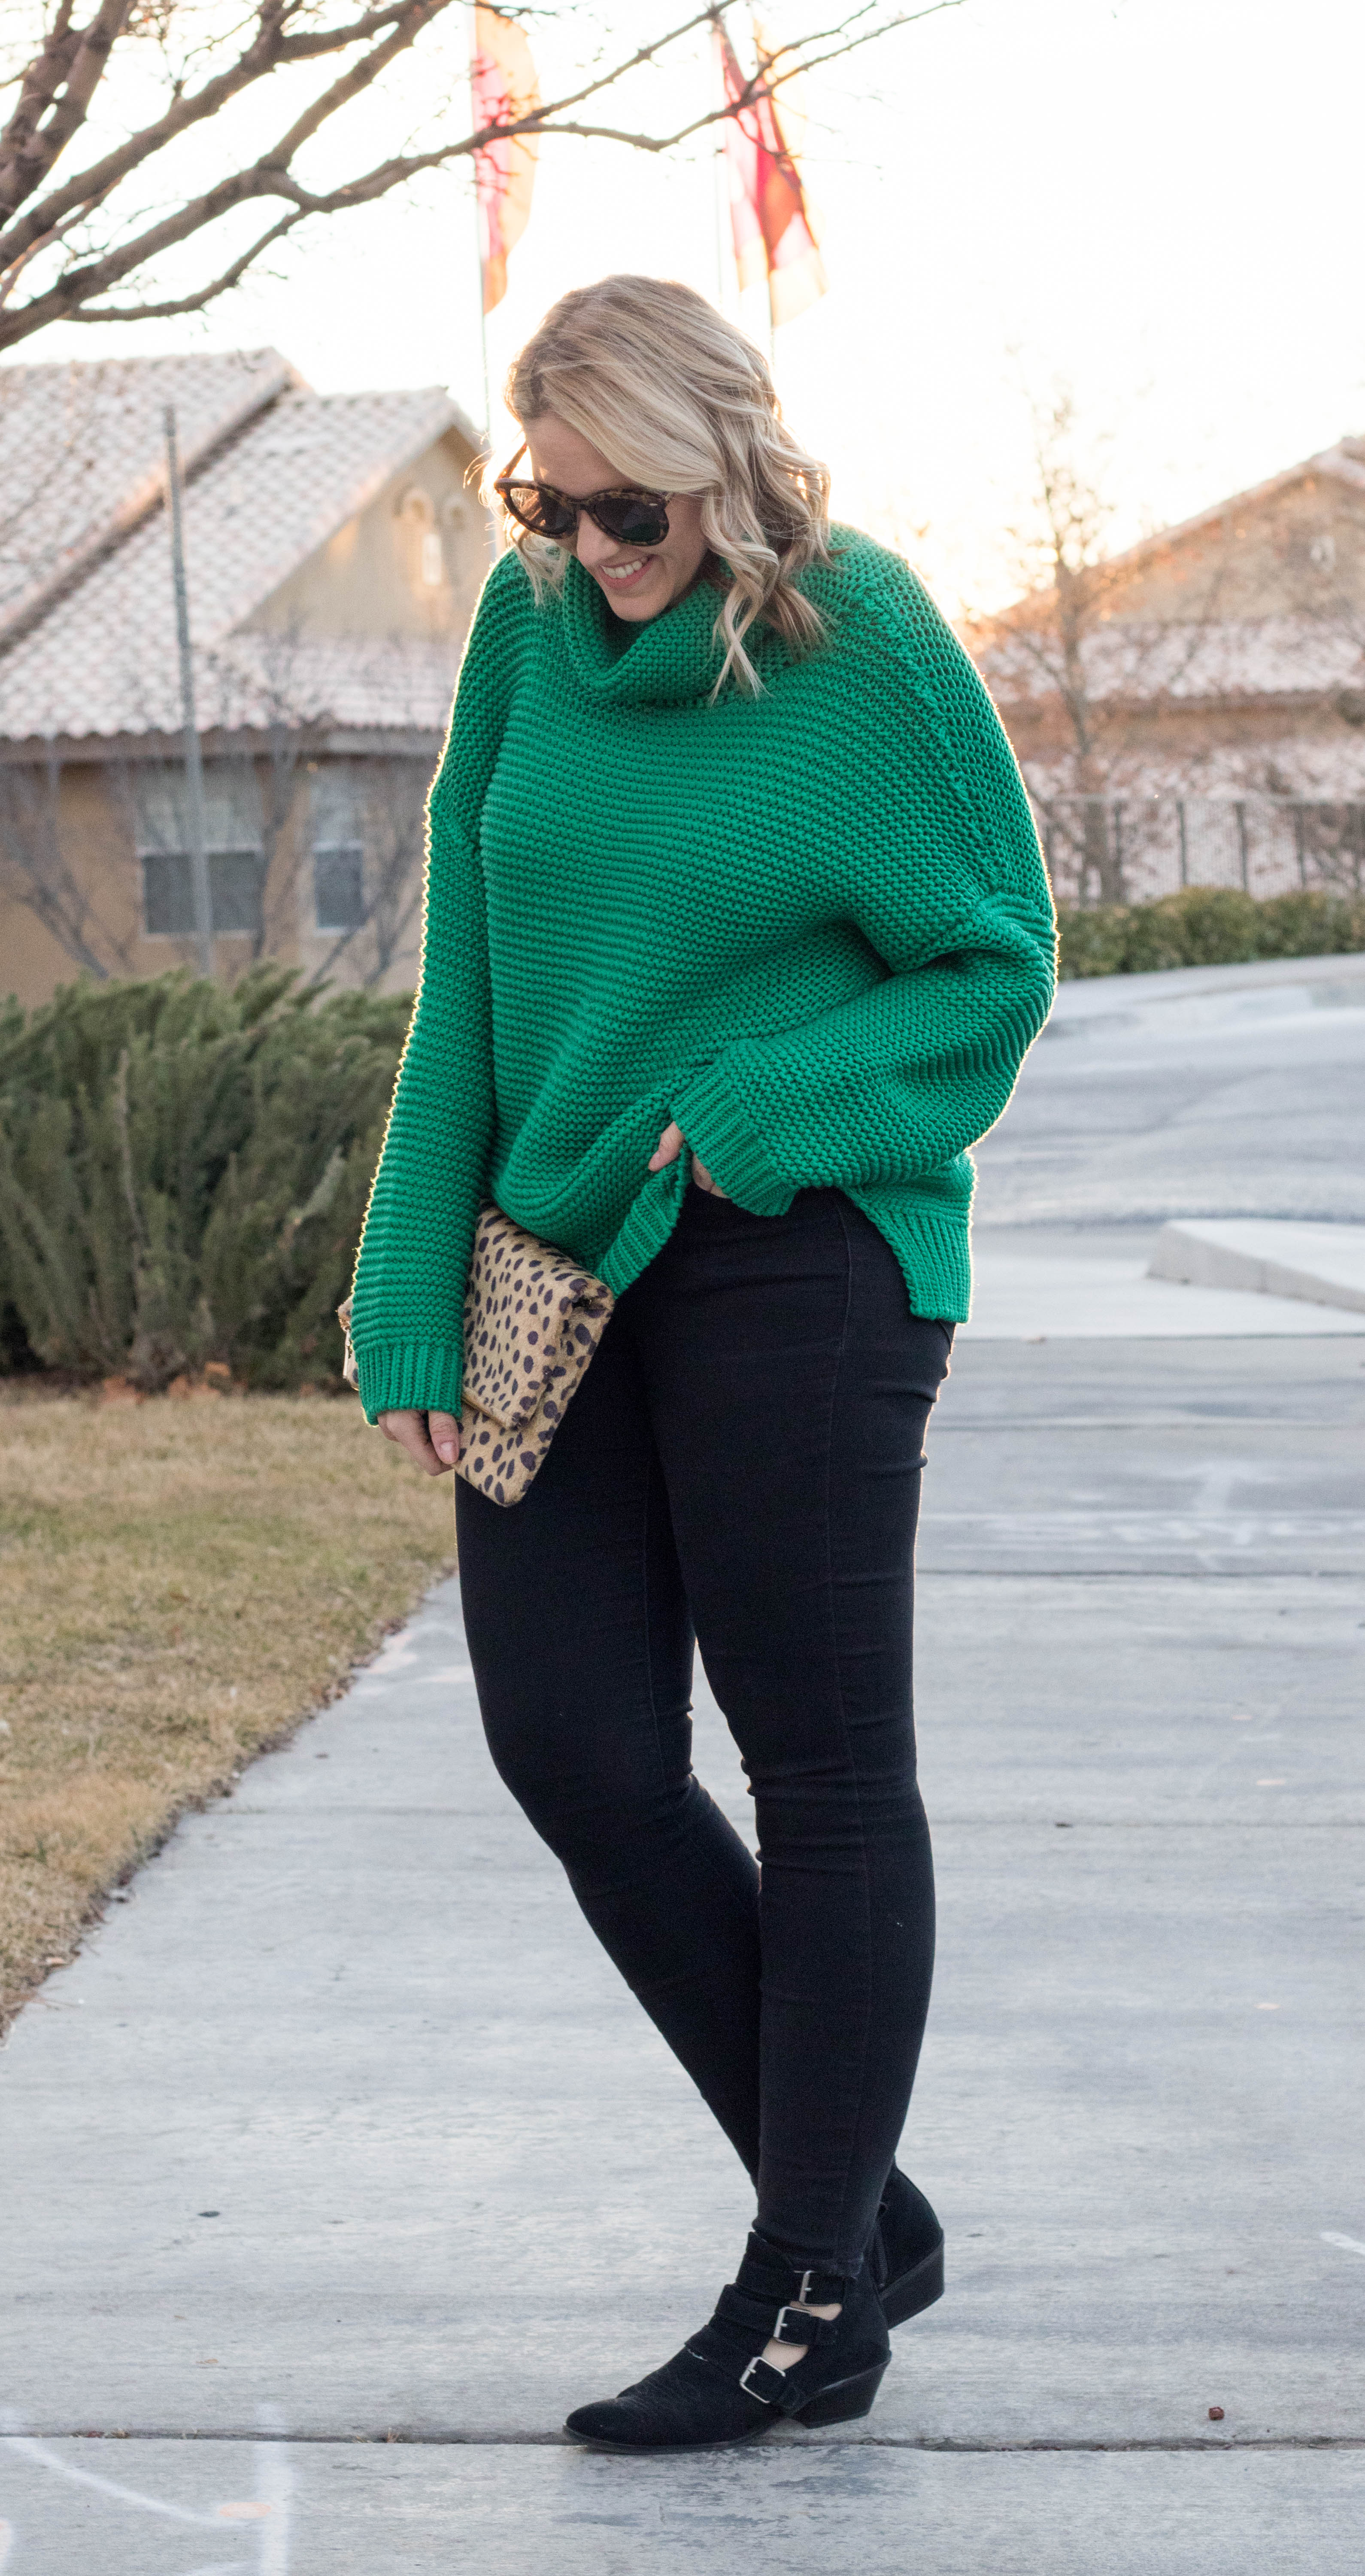 how to style black ankle boots #targetstyle #target #winterlayers